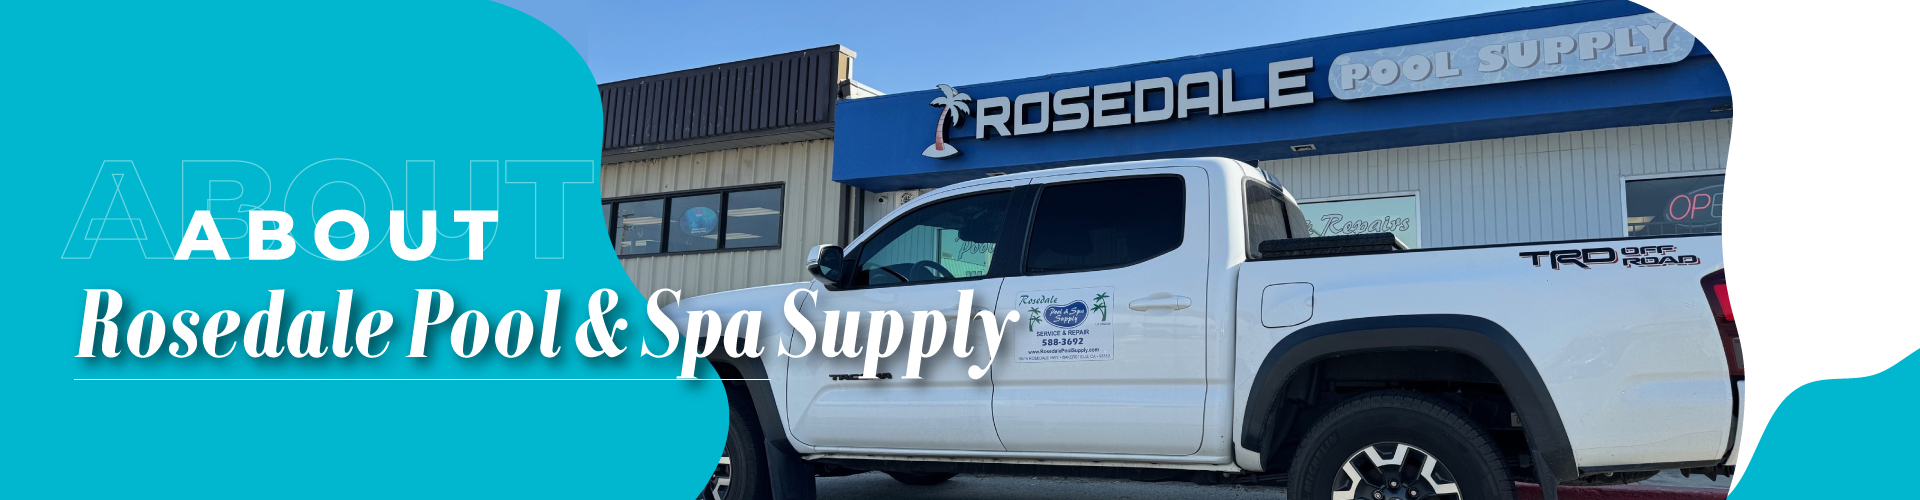 About Us - Rosedale Pool & Spa Supply